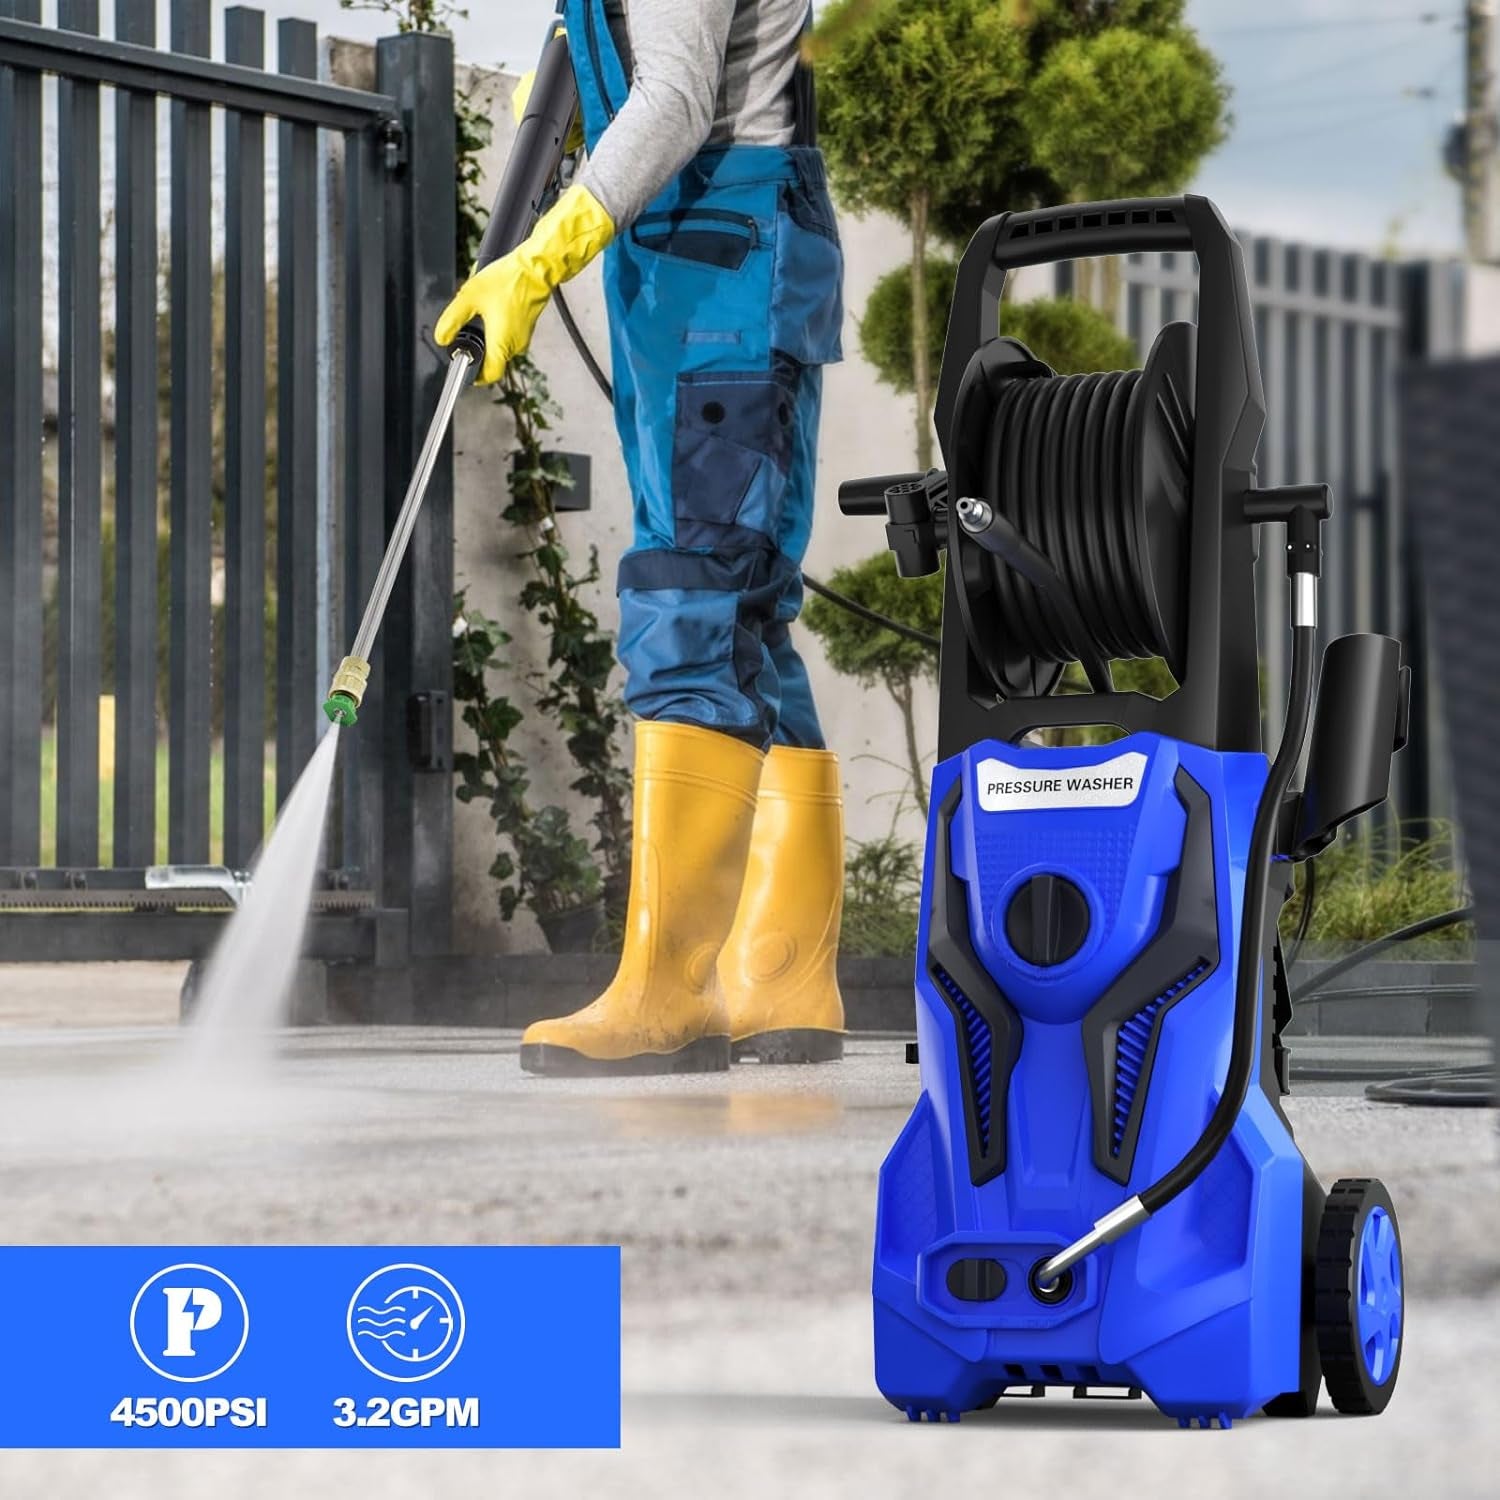 Electric Pressure Washer - 4500 PSI 3.2 GPM  Power Washer for Cars Washing with 25FT Pressure Hose, Blue